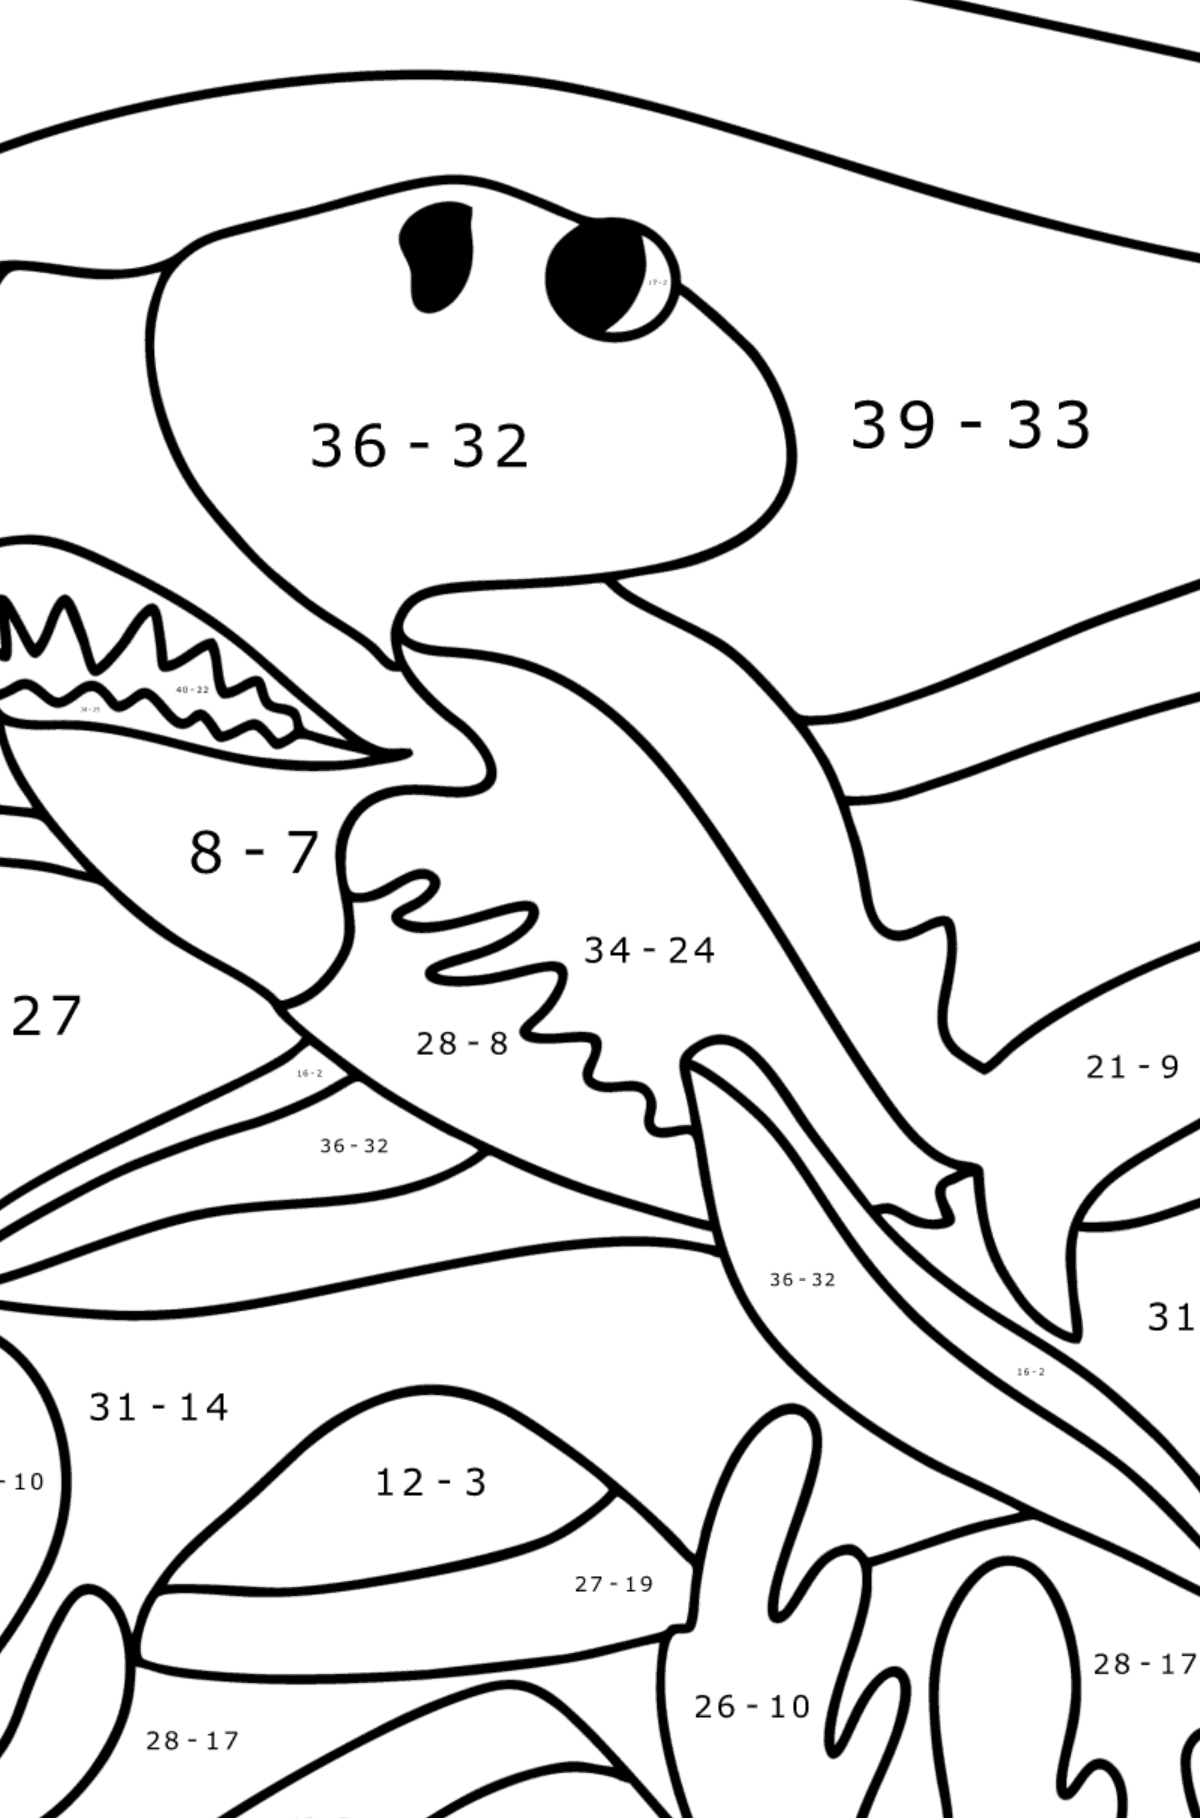 Hammerhead shark coloring page - Math Coloring - Subtraction for Kids